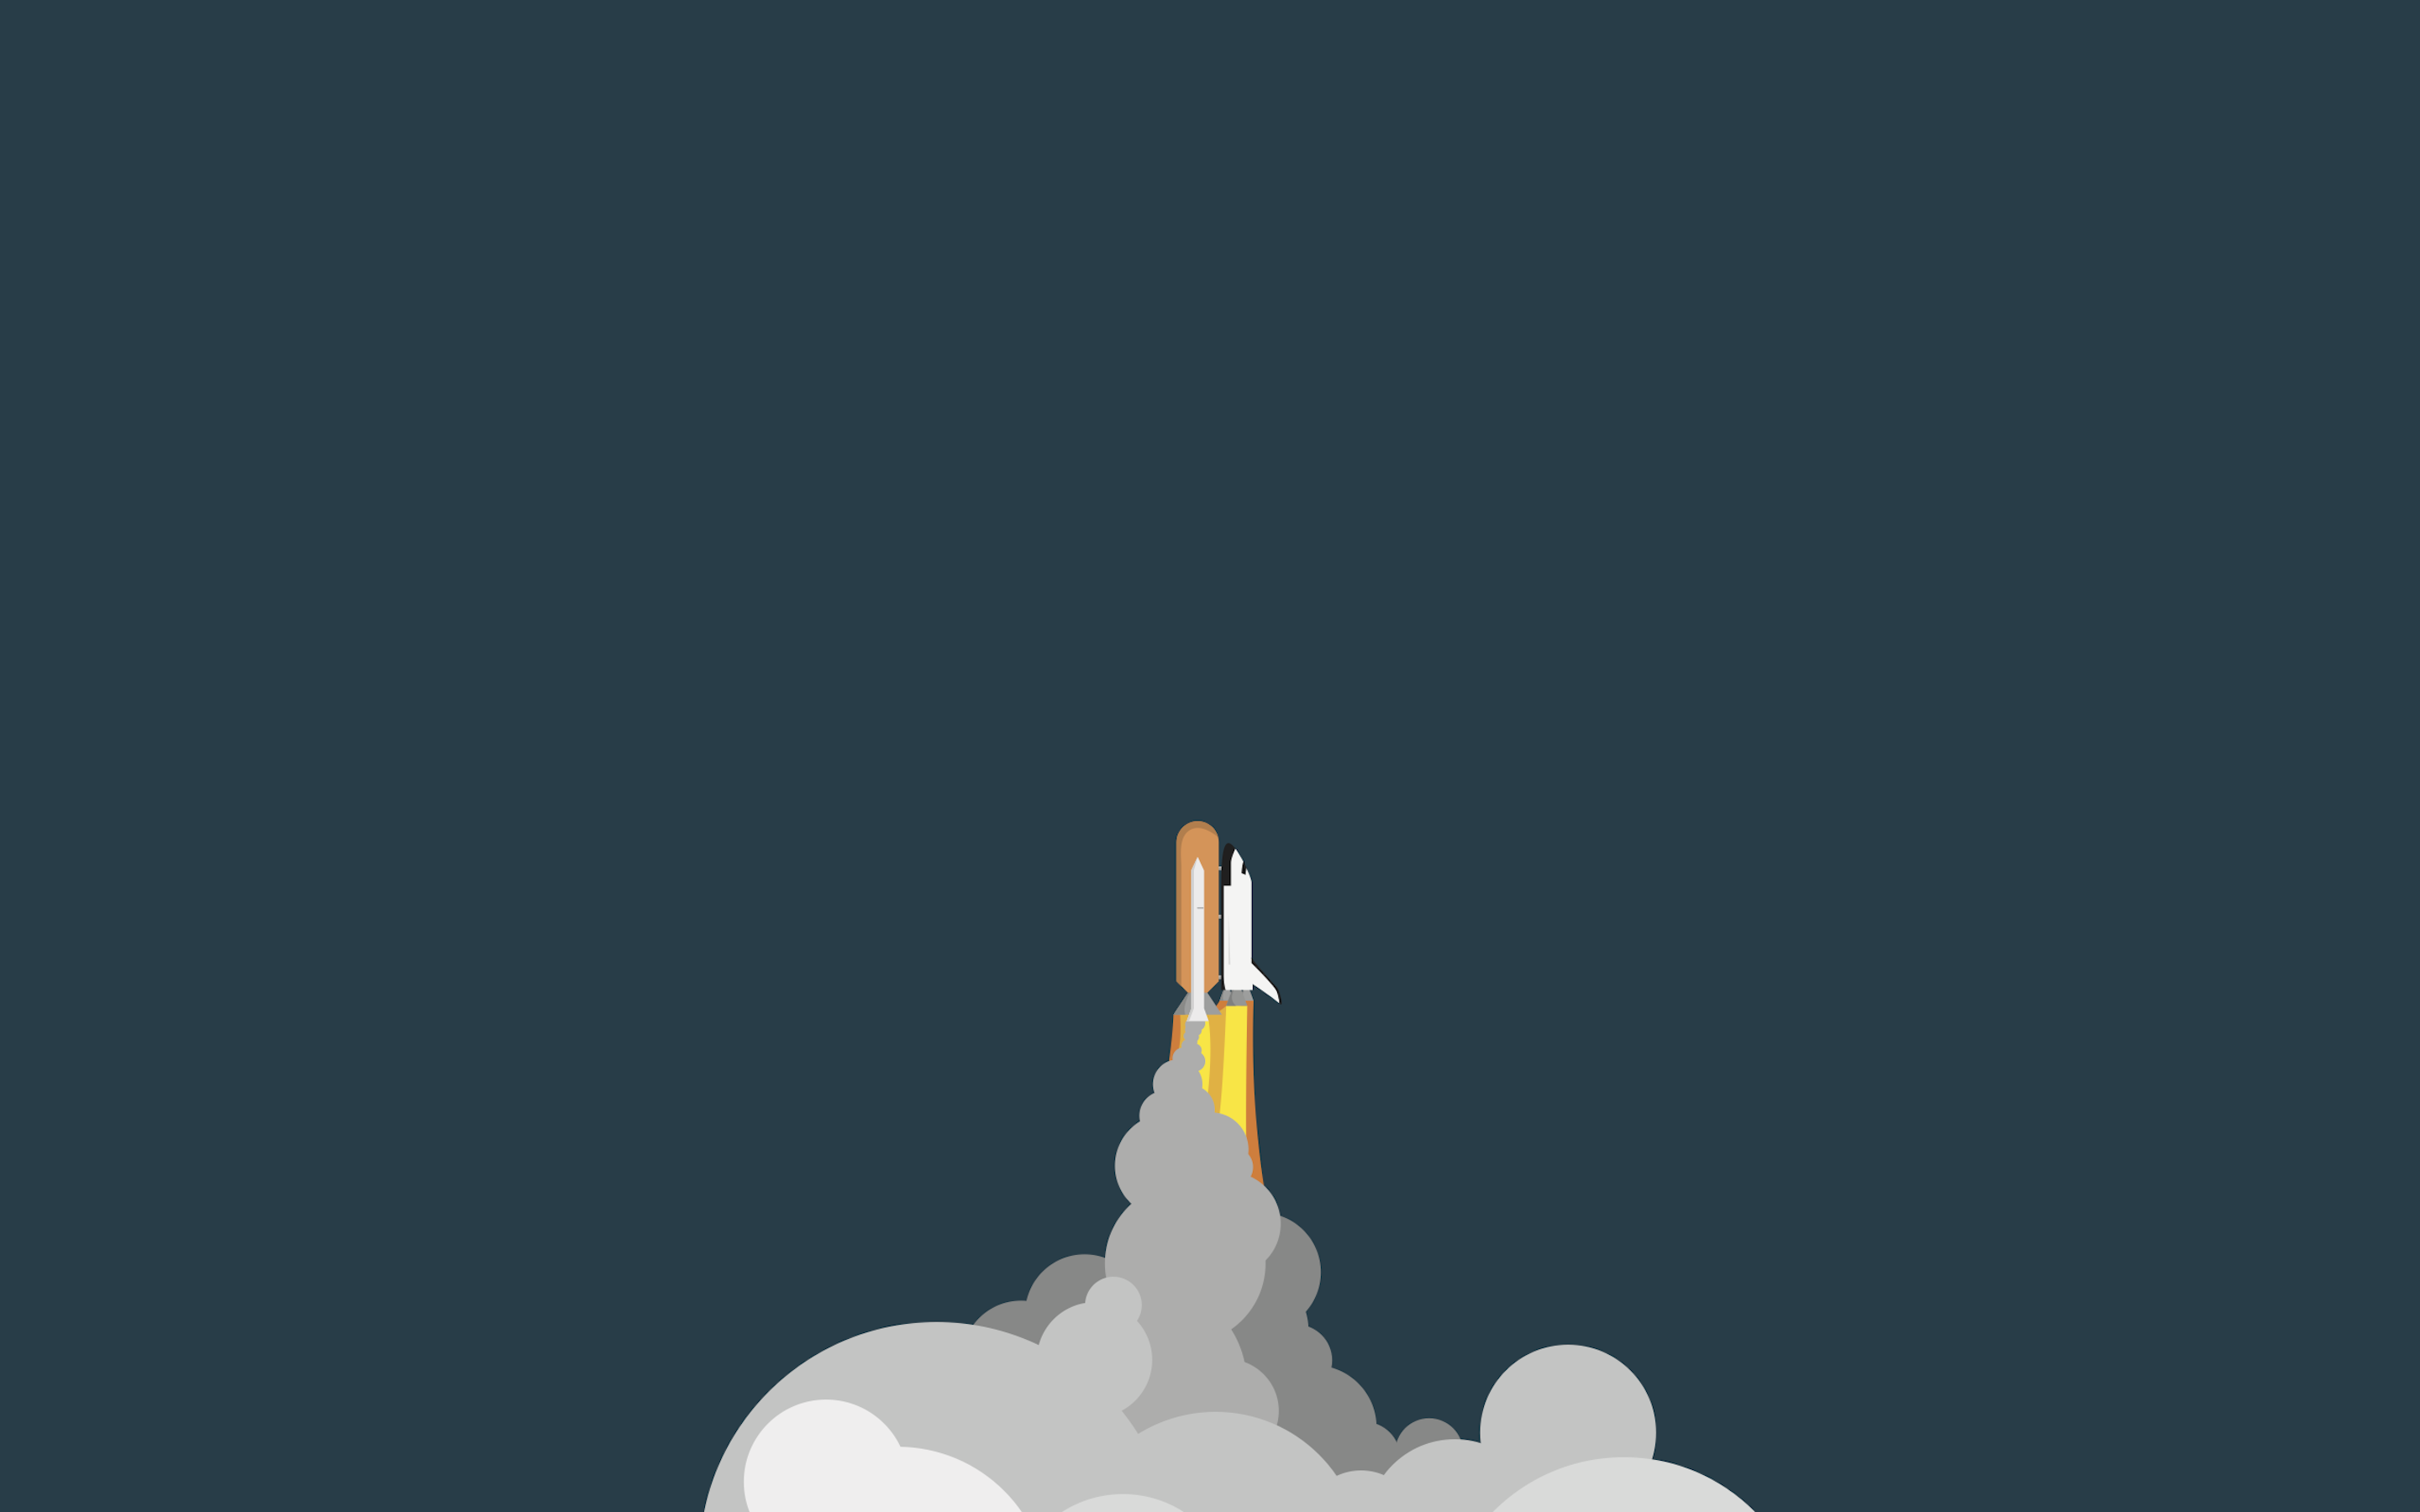 Classical-Simple-Wallpaper-Rocket-Image-Smoke-Picture.png